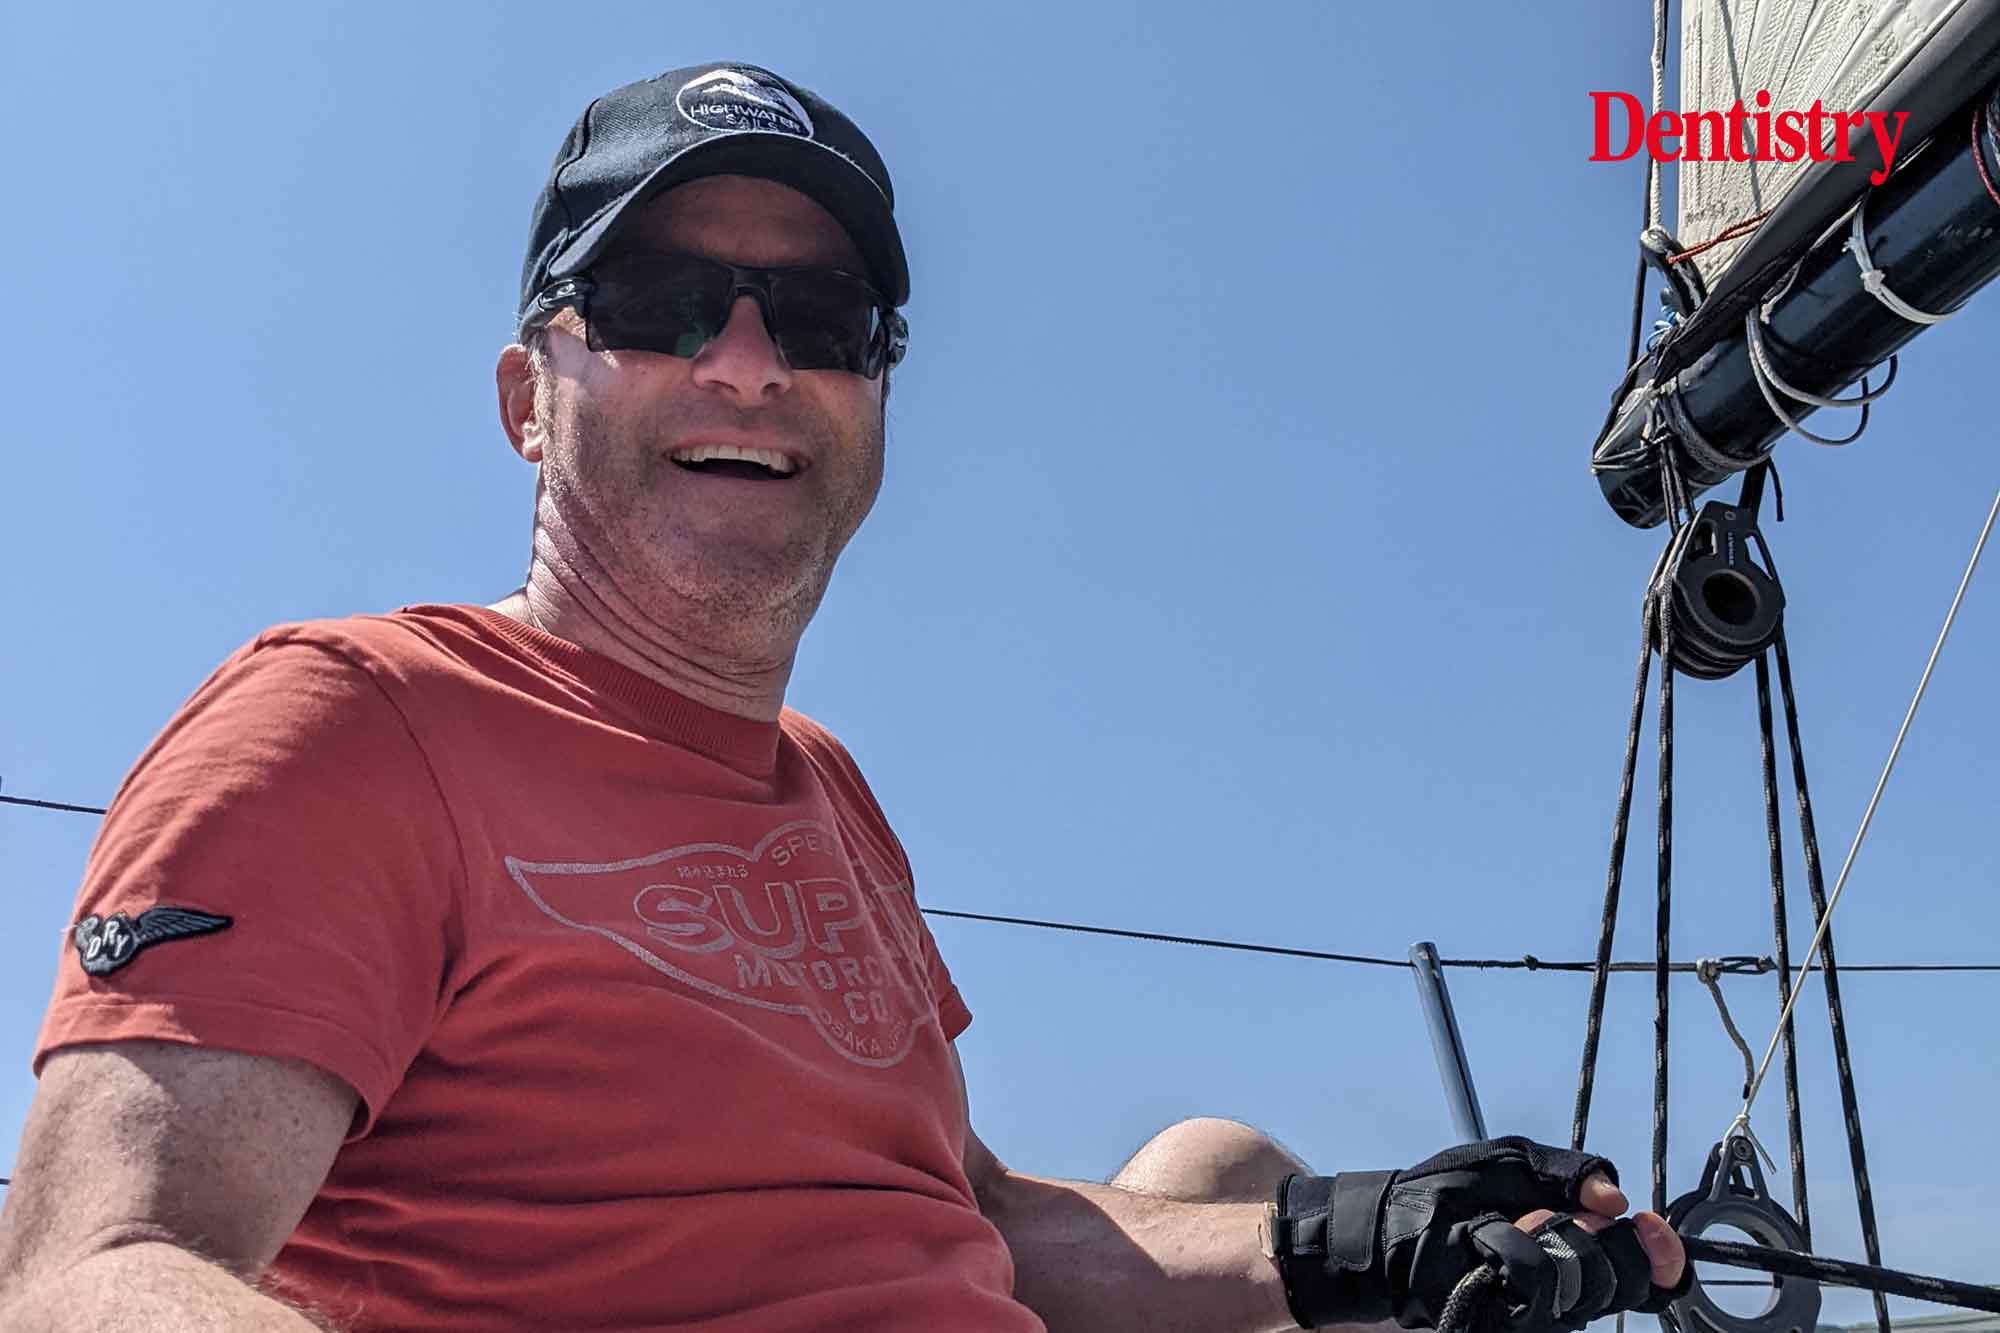 Andrew Fennell’s love of sailing goes well beyond your typical hobby